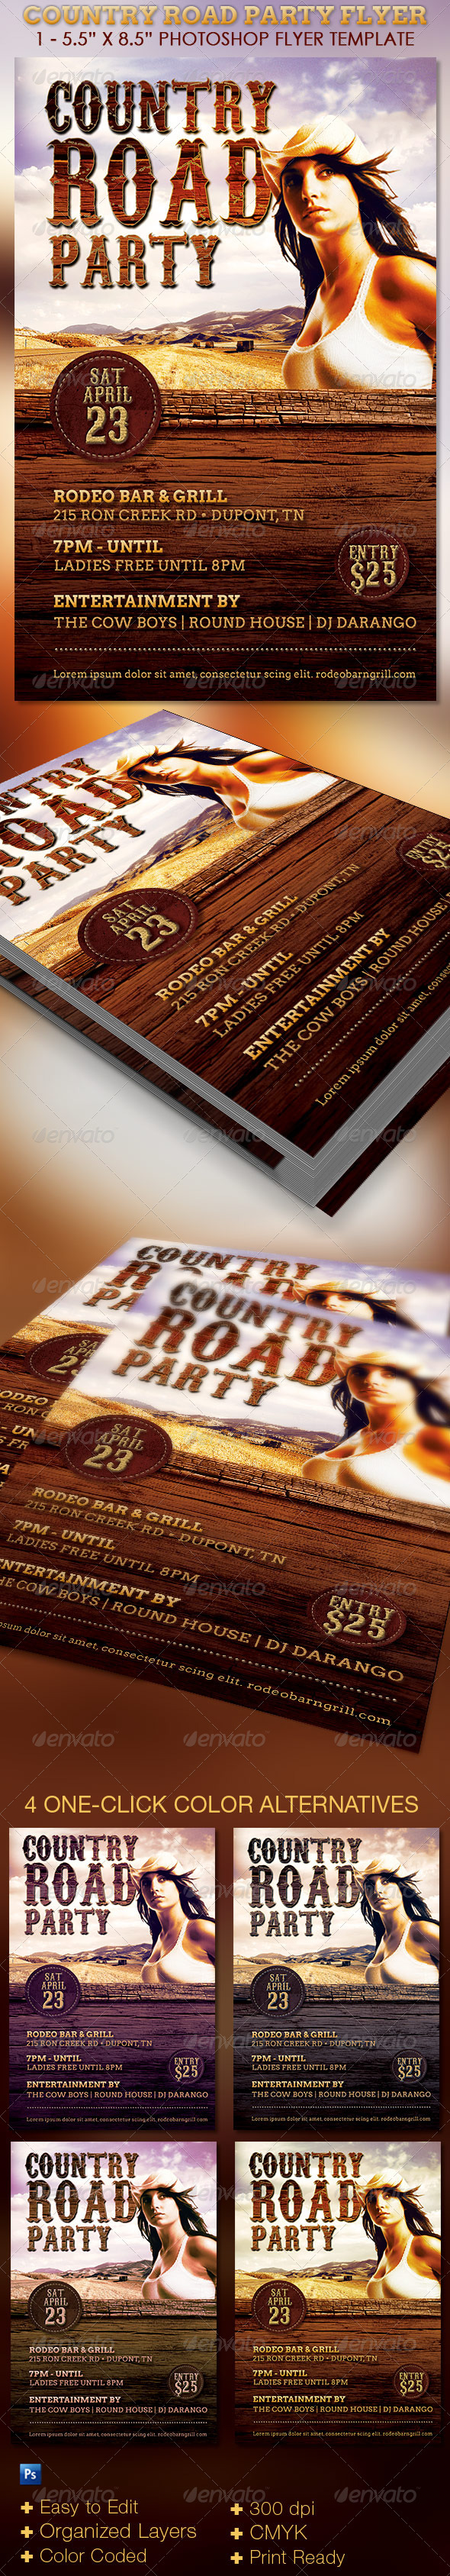 GraphicRiver Country Road Party Flyer Template 7670345